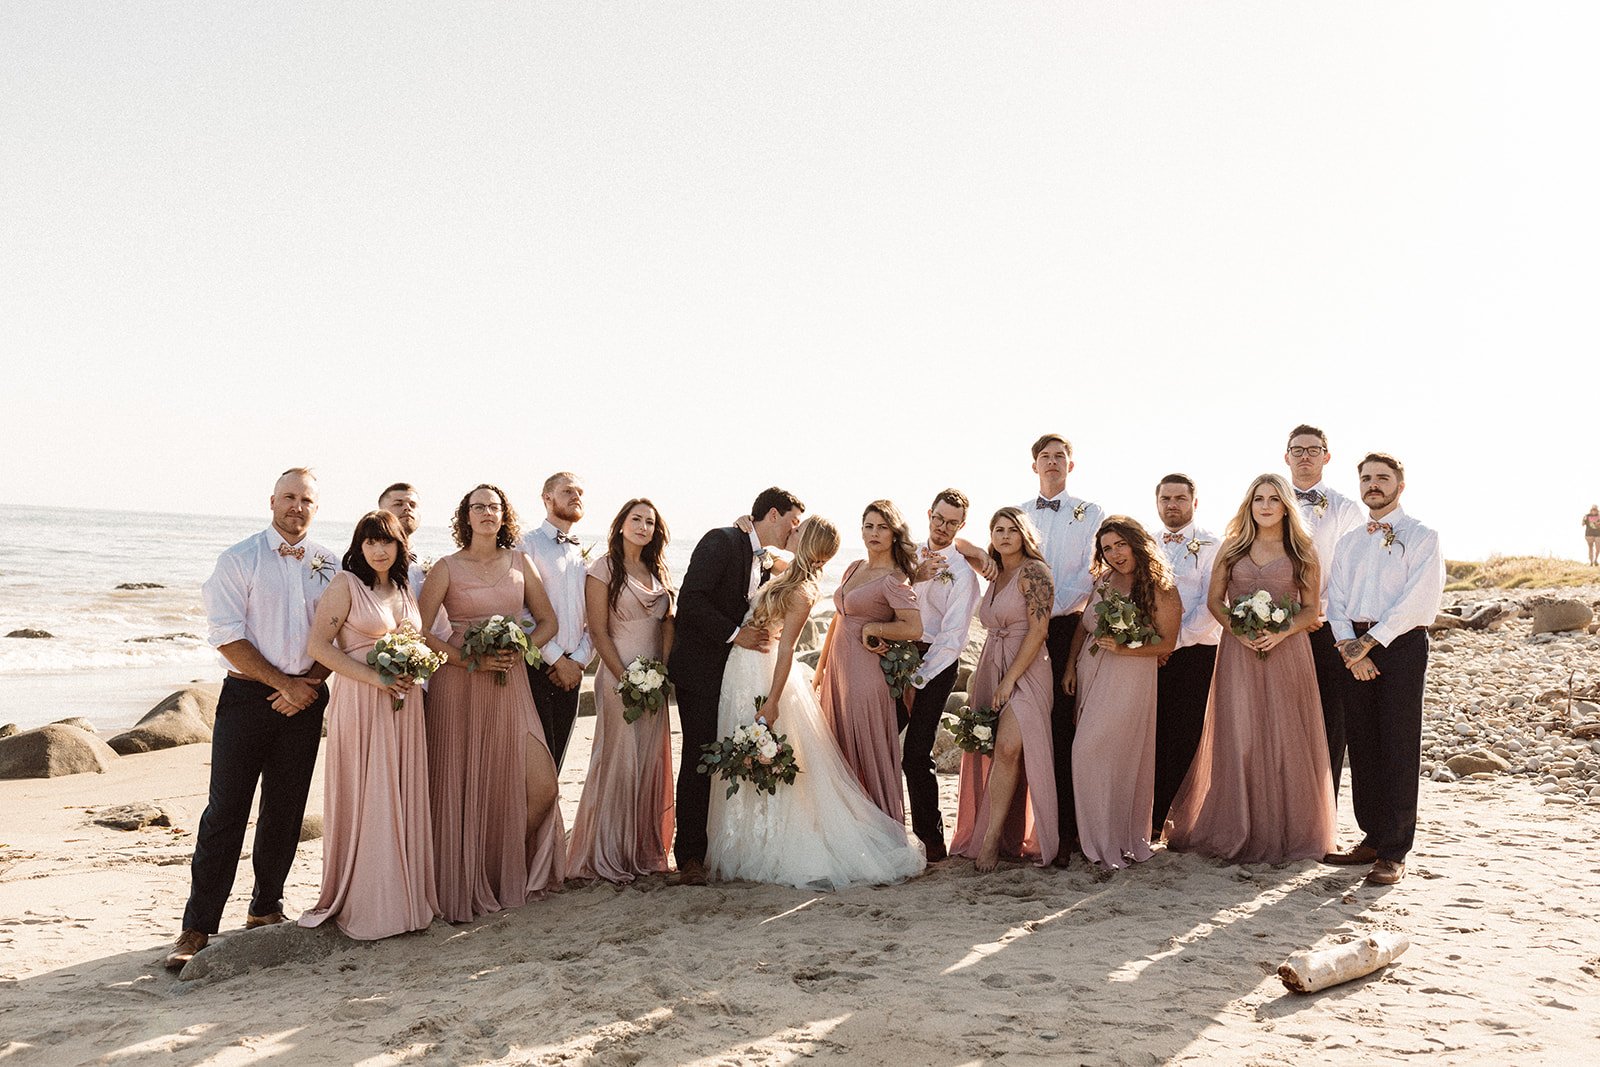 www.santabarbarawedding.com | Isabella Griffith Photography | El Capitan State Beach | KB Events | Alexis Ireland Florals | Bride and Groom Kiss Surrounded by Bridal Party 